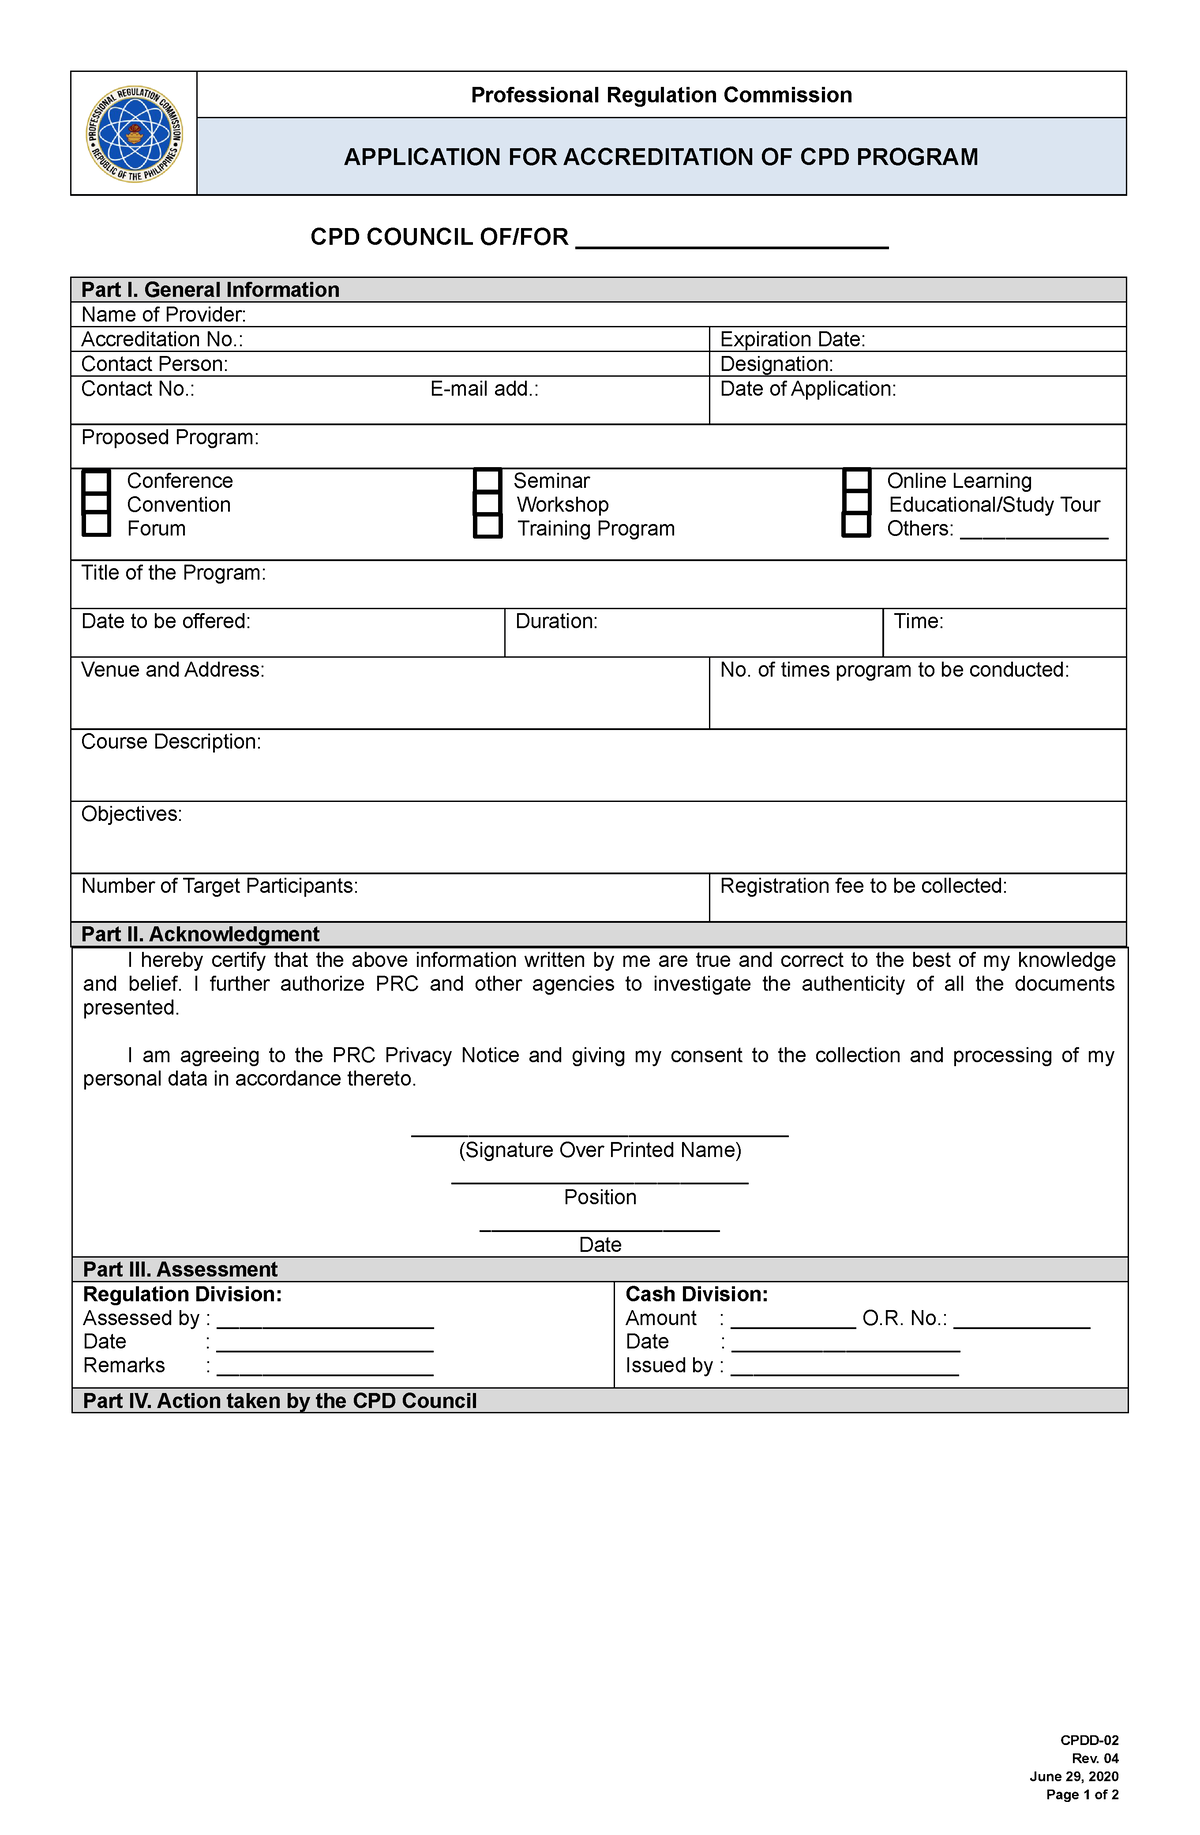 CPDD02 CPD Professional Regulation Commission APPLICATION FOR